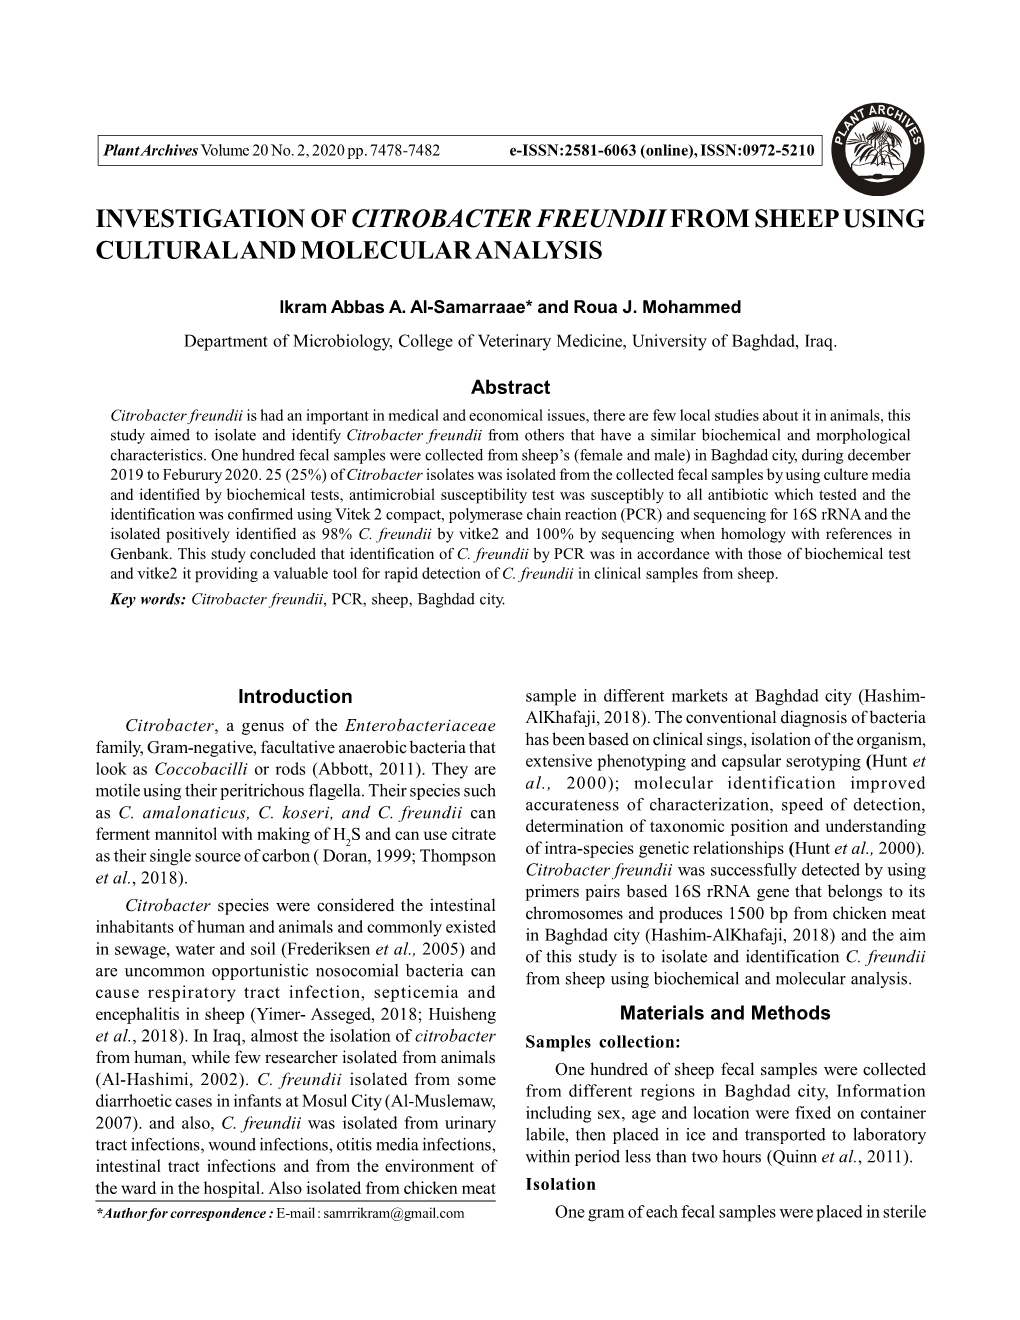 Investigation of Citrobacter Freundiifrom Sheep Using Cultural and Molecular Analysis